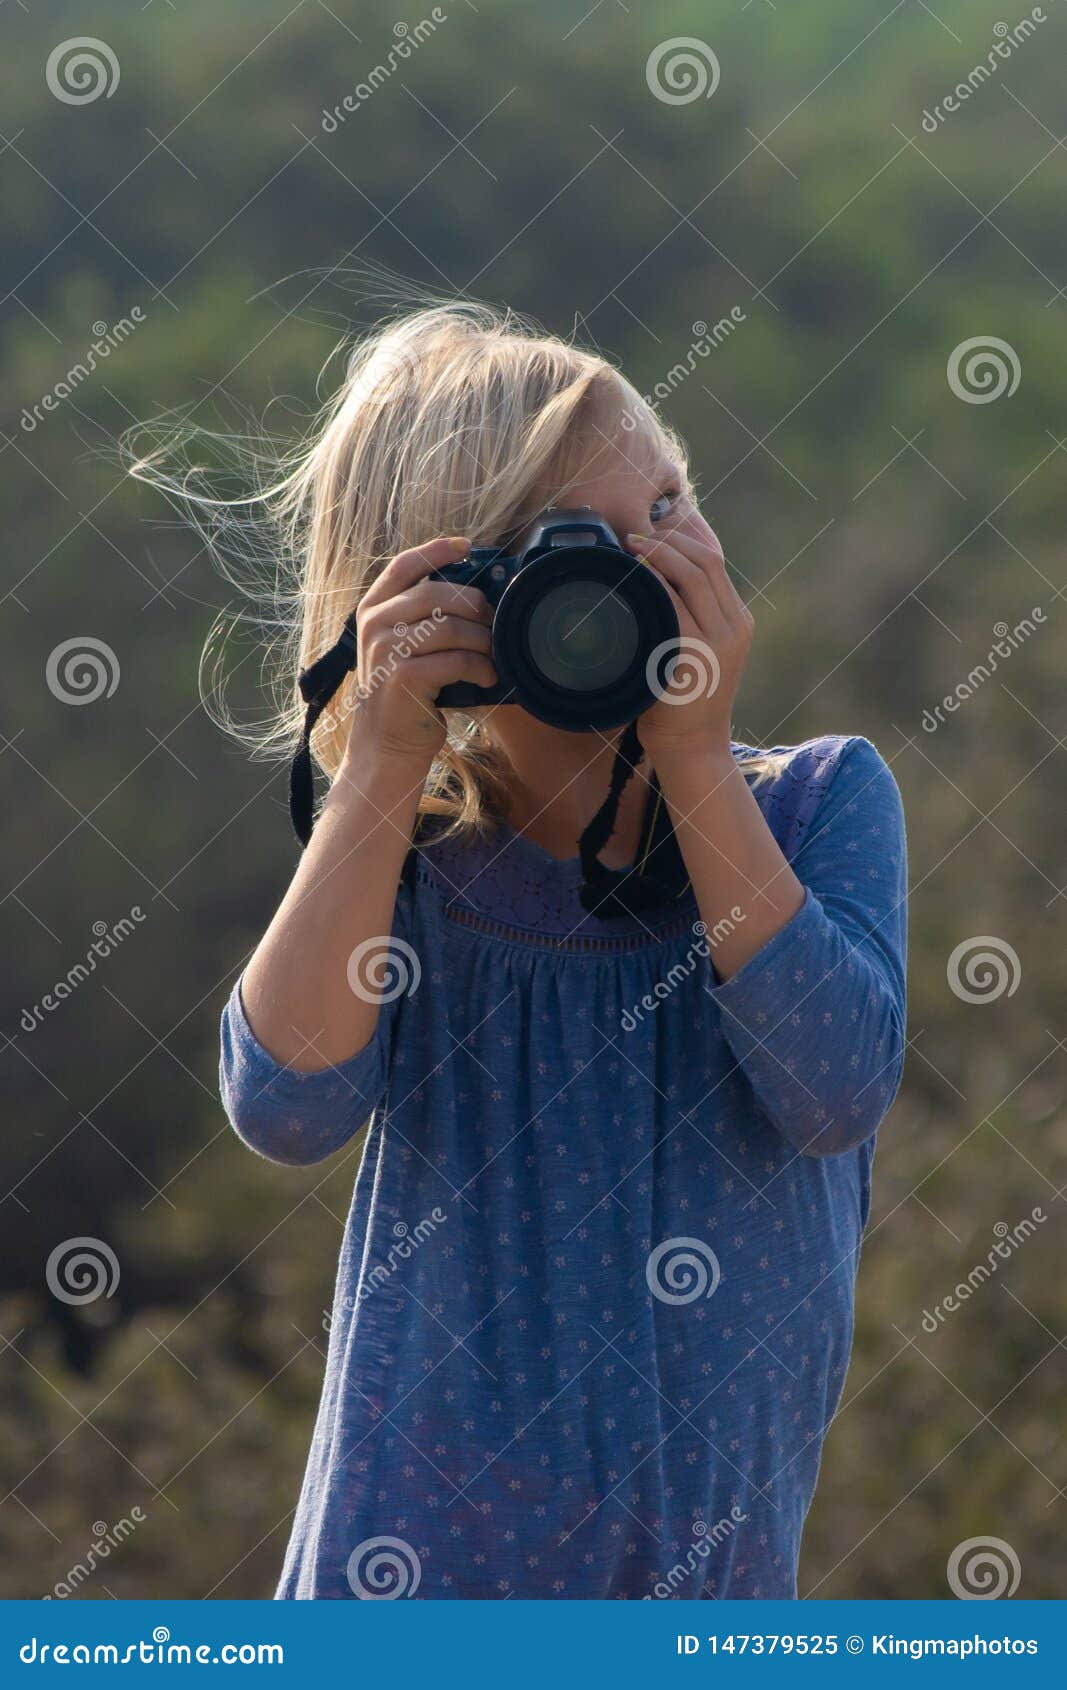 young girl in nature taking pictures with a large dslr and a zoon lens